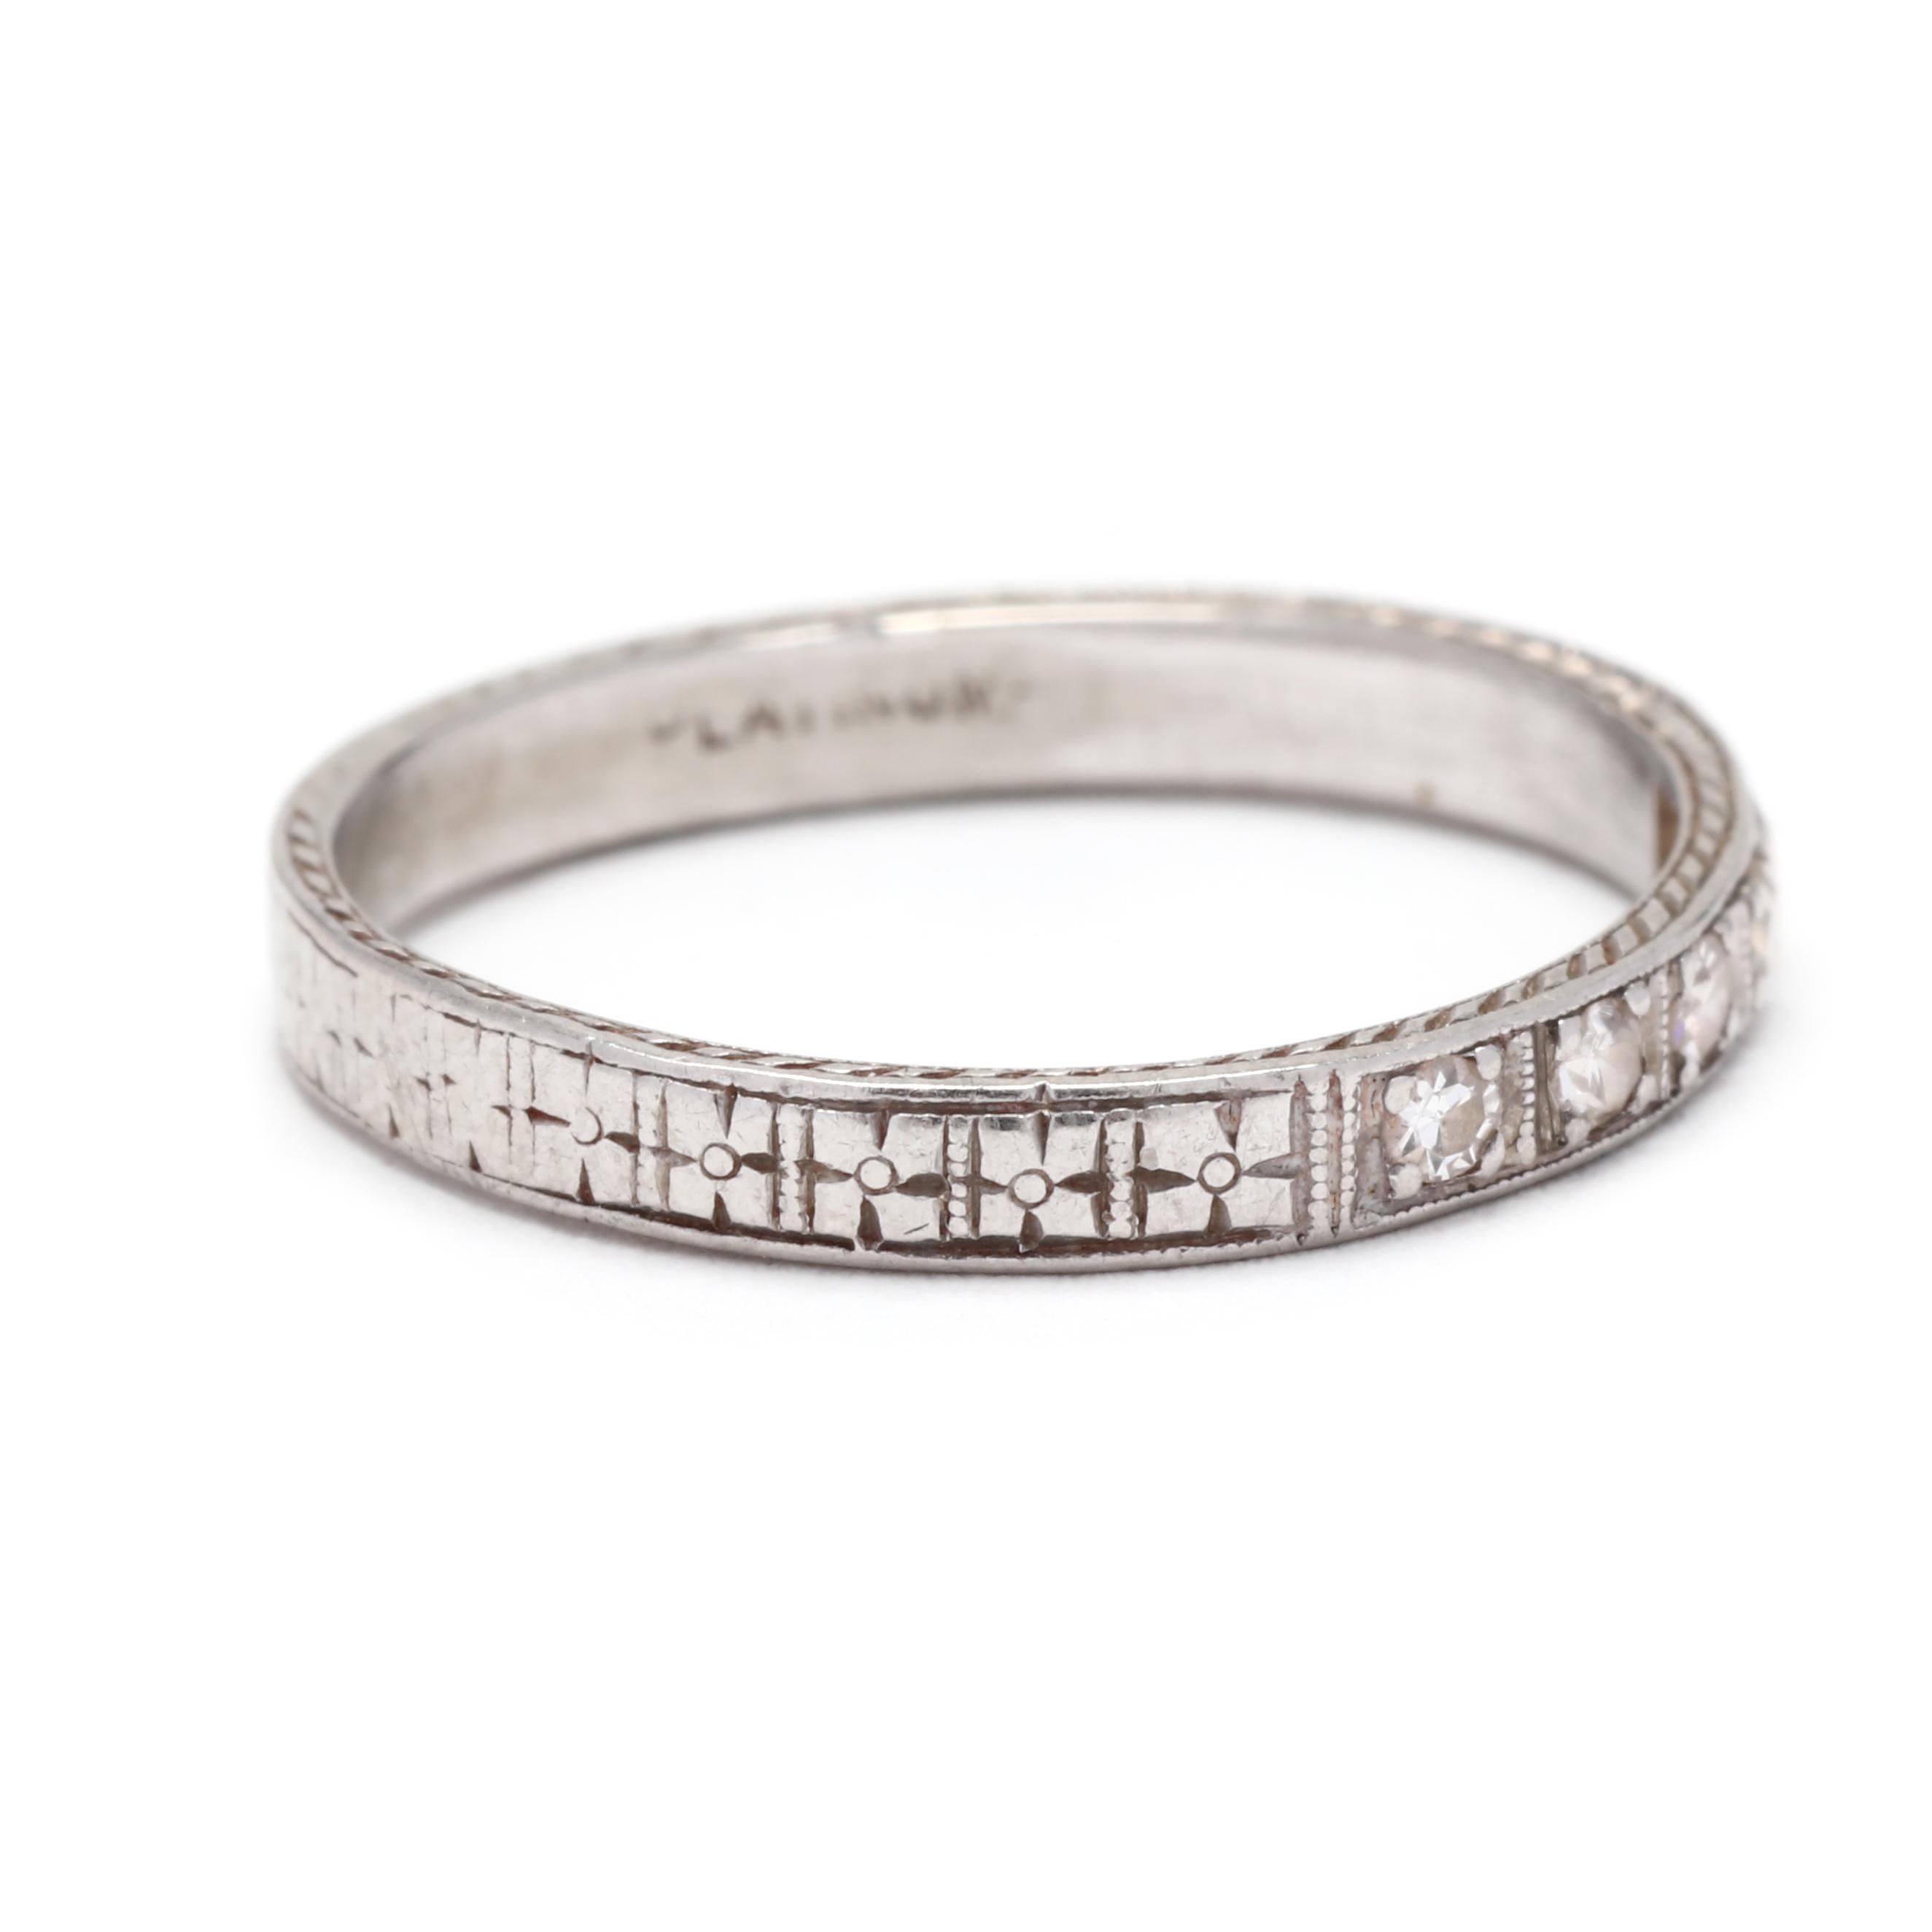 This beautiful Art Deco .08ctw Diamond Engraved Wedding Band is the perfect way to add a touch of sophistication to your wedding day. Crafted in Platinum, this ring features a delicate engraved diamond pattern and a timeless stackable design. With a